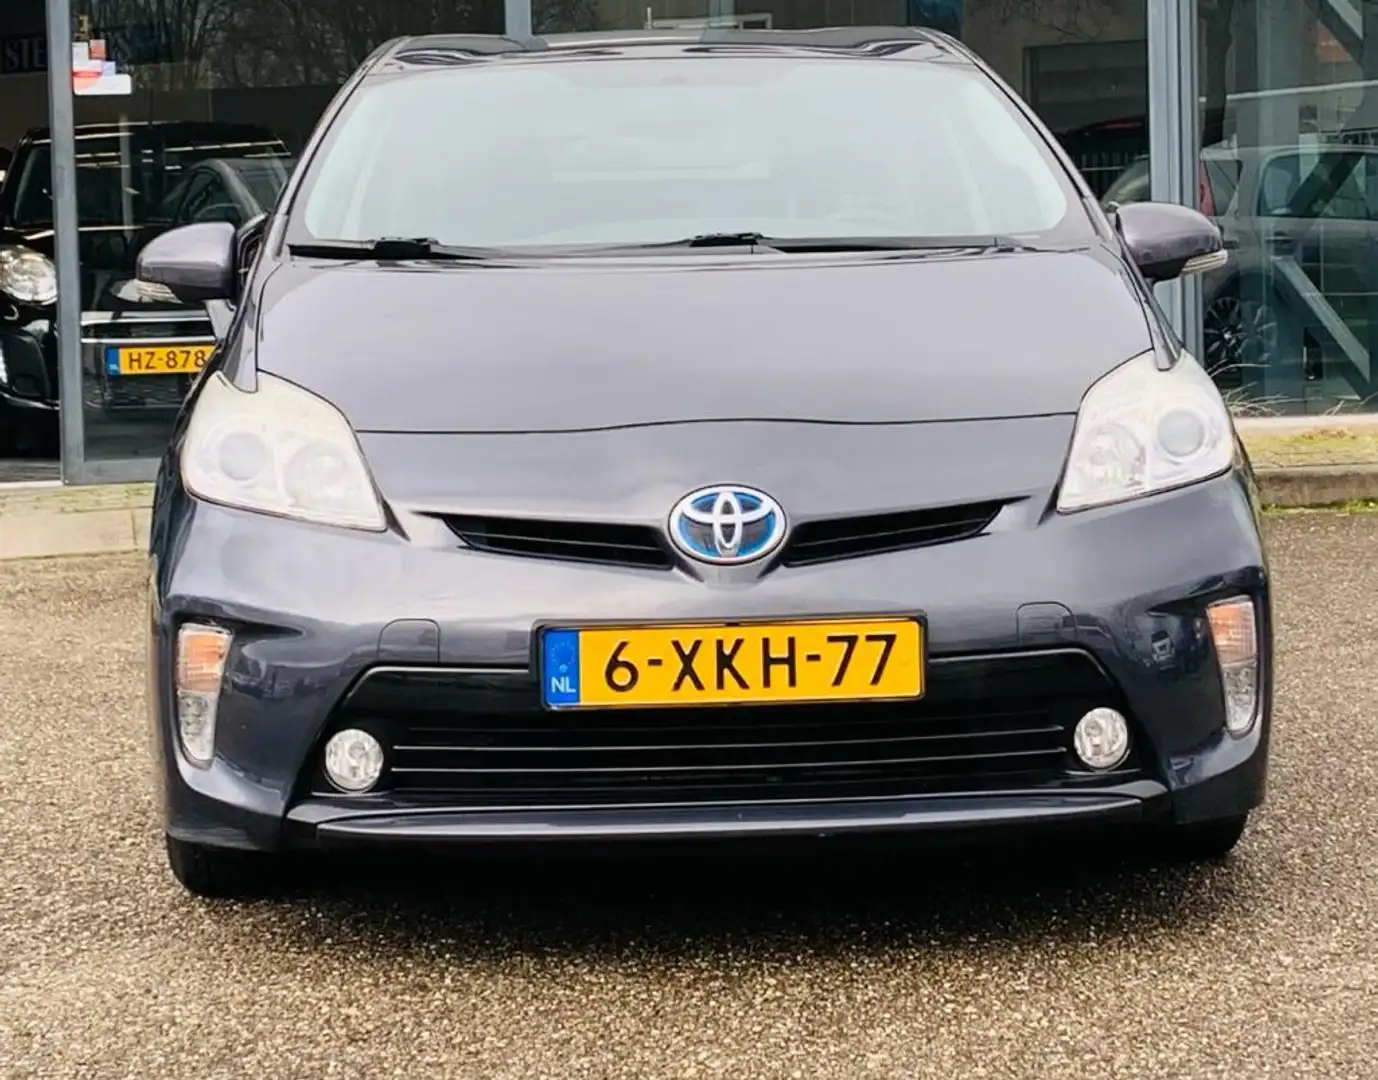 Toyota Prius 1.8 Comfort Top 5 edition, KM 77300 NAP, Cruise Co Grey - 2